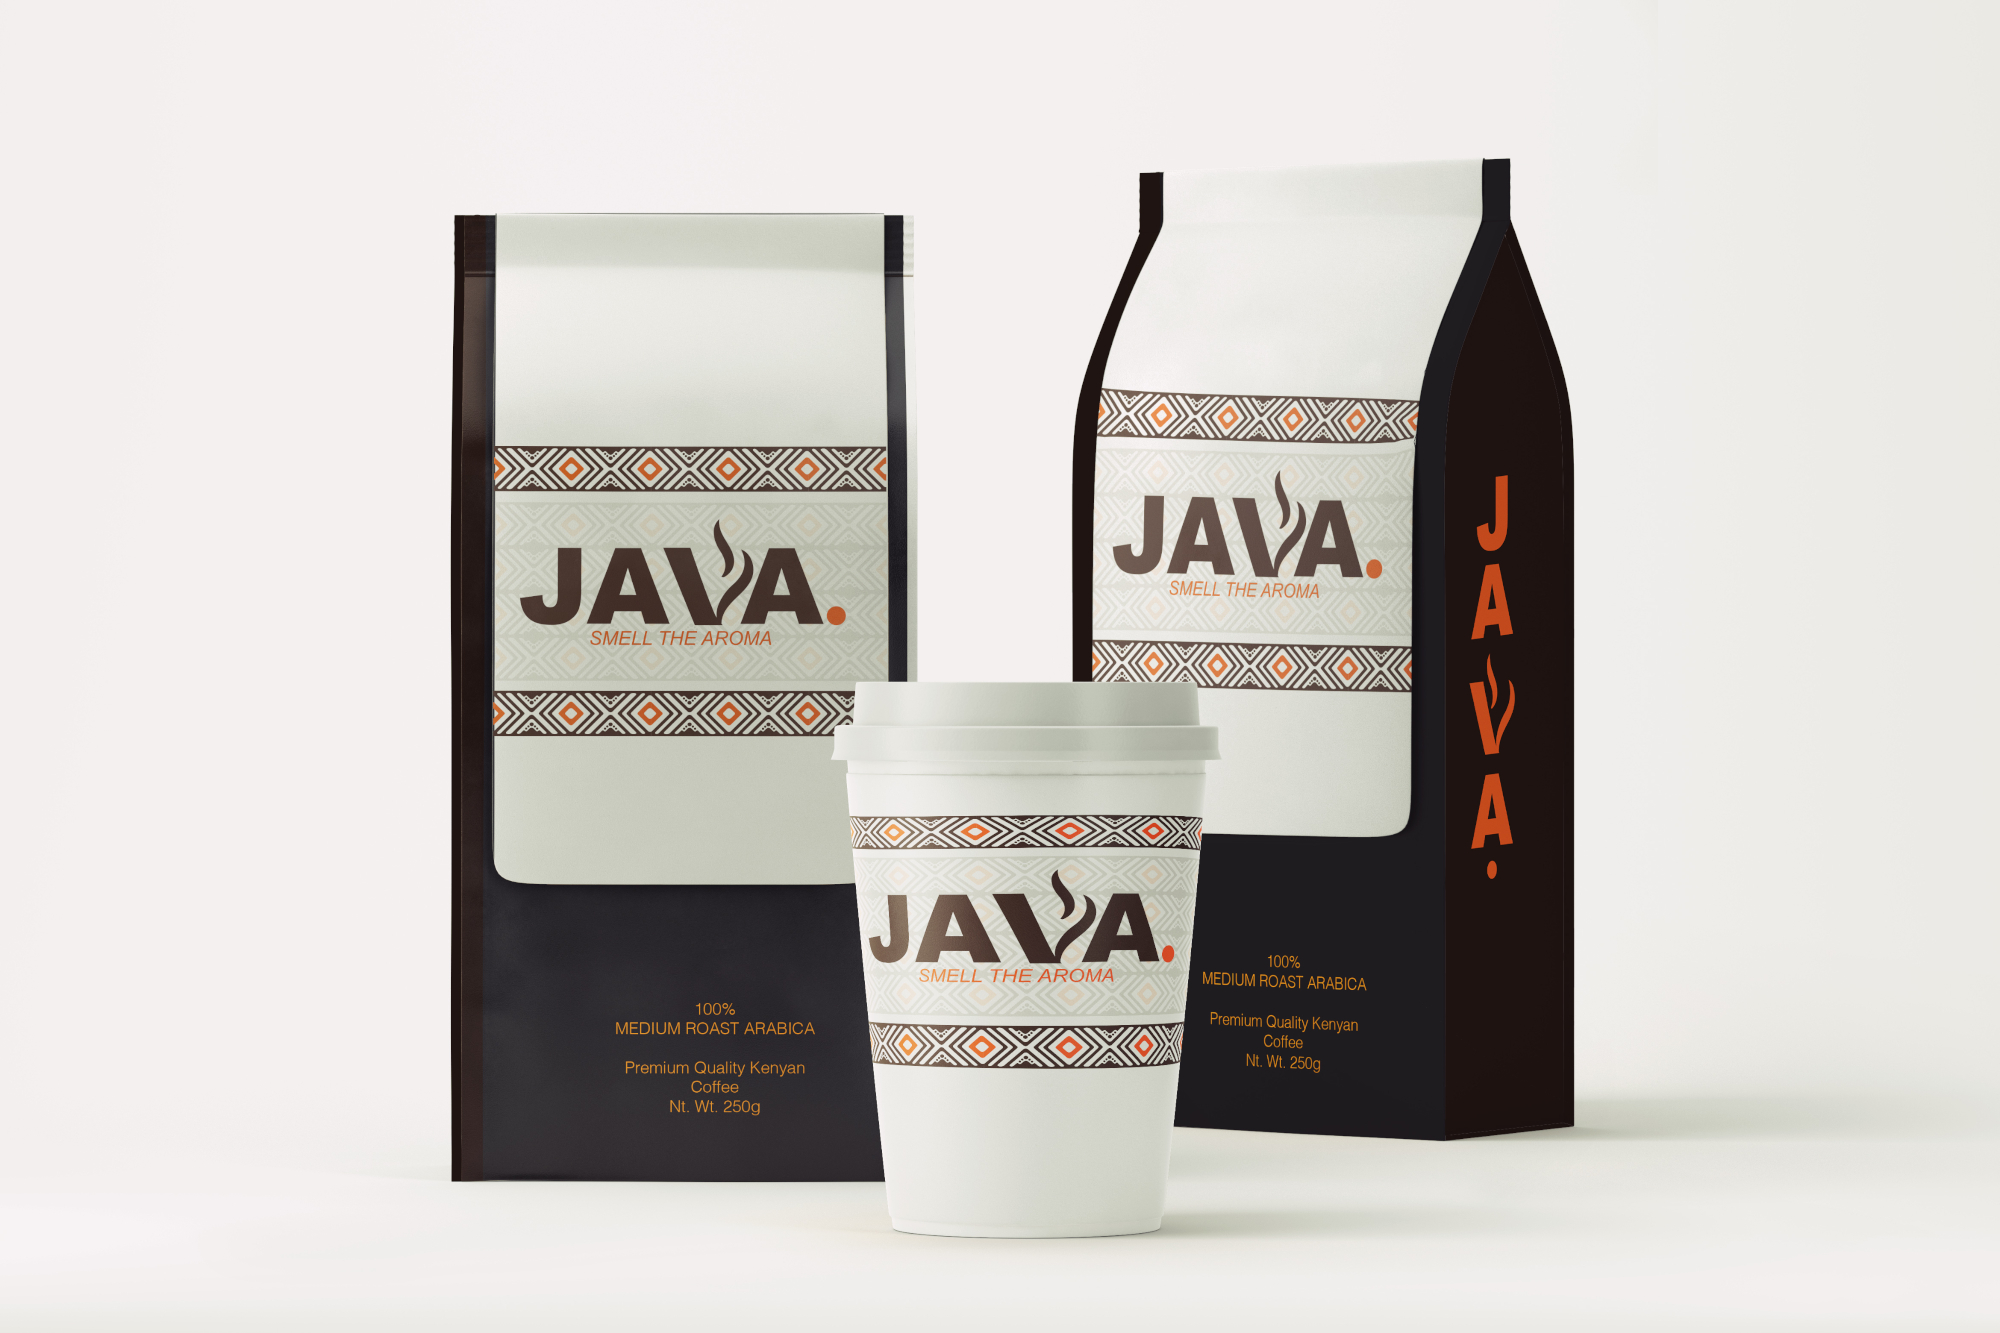 Designs for coffee brand bags and cup